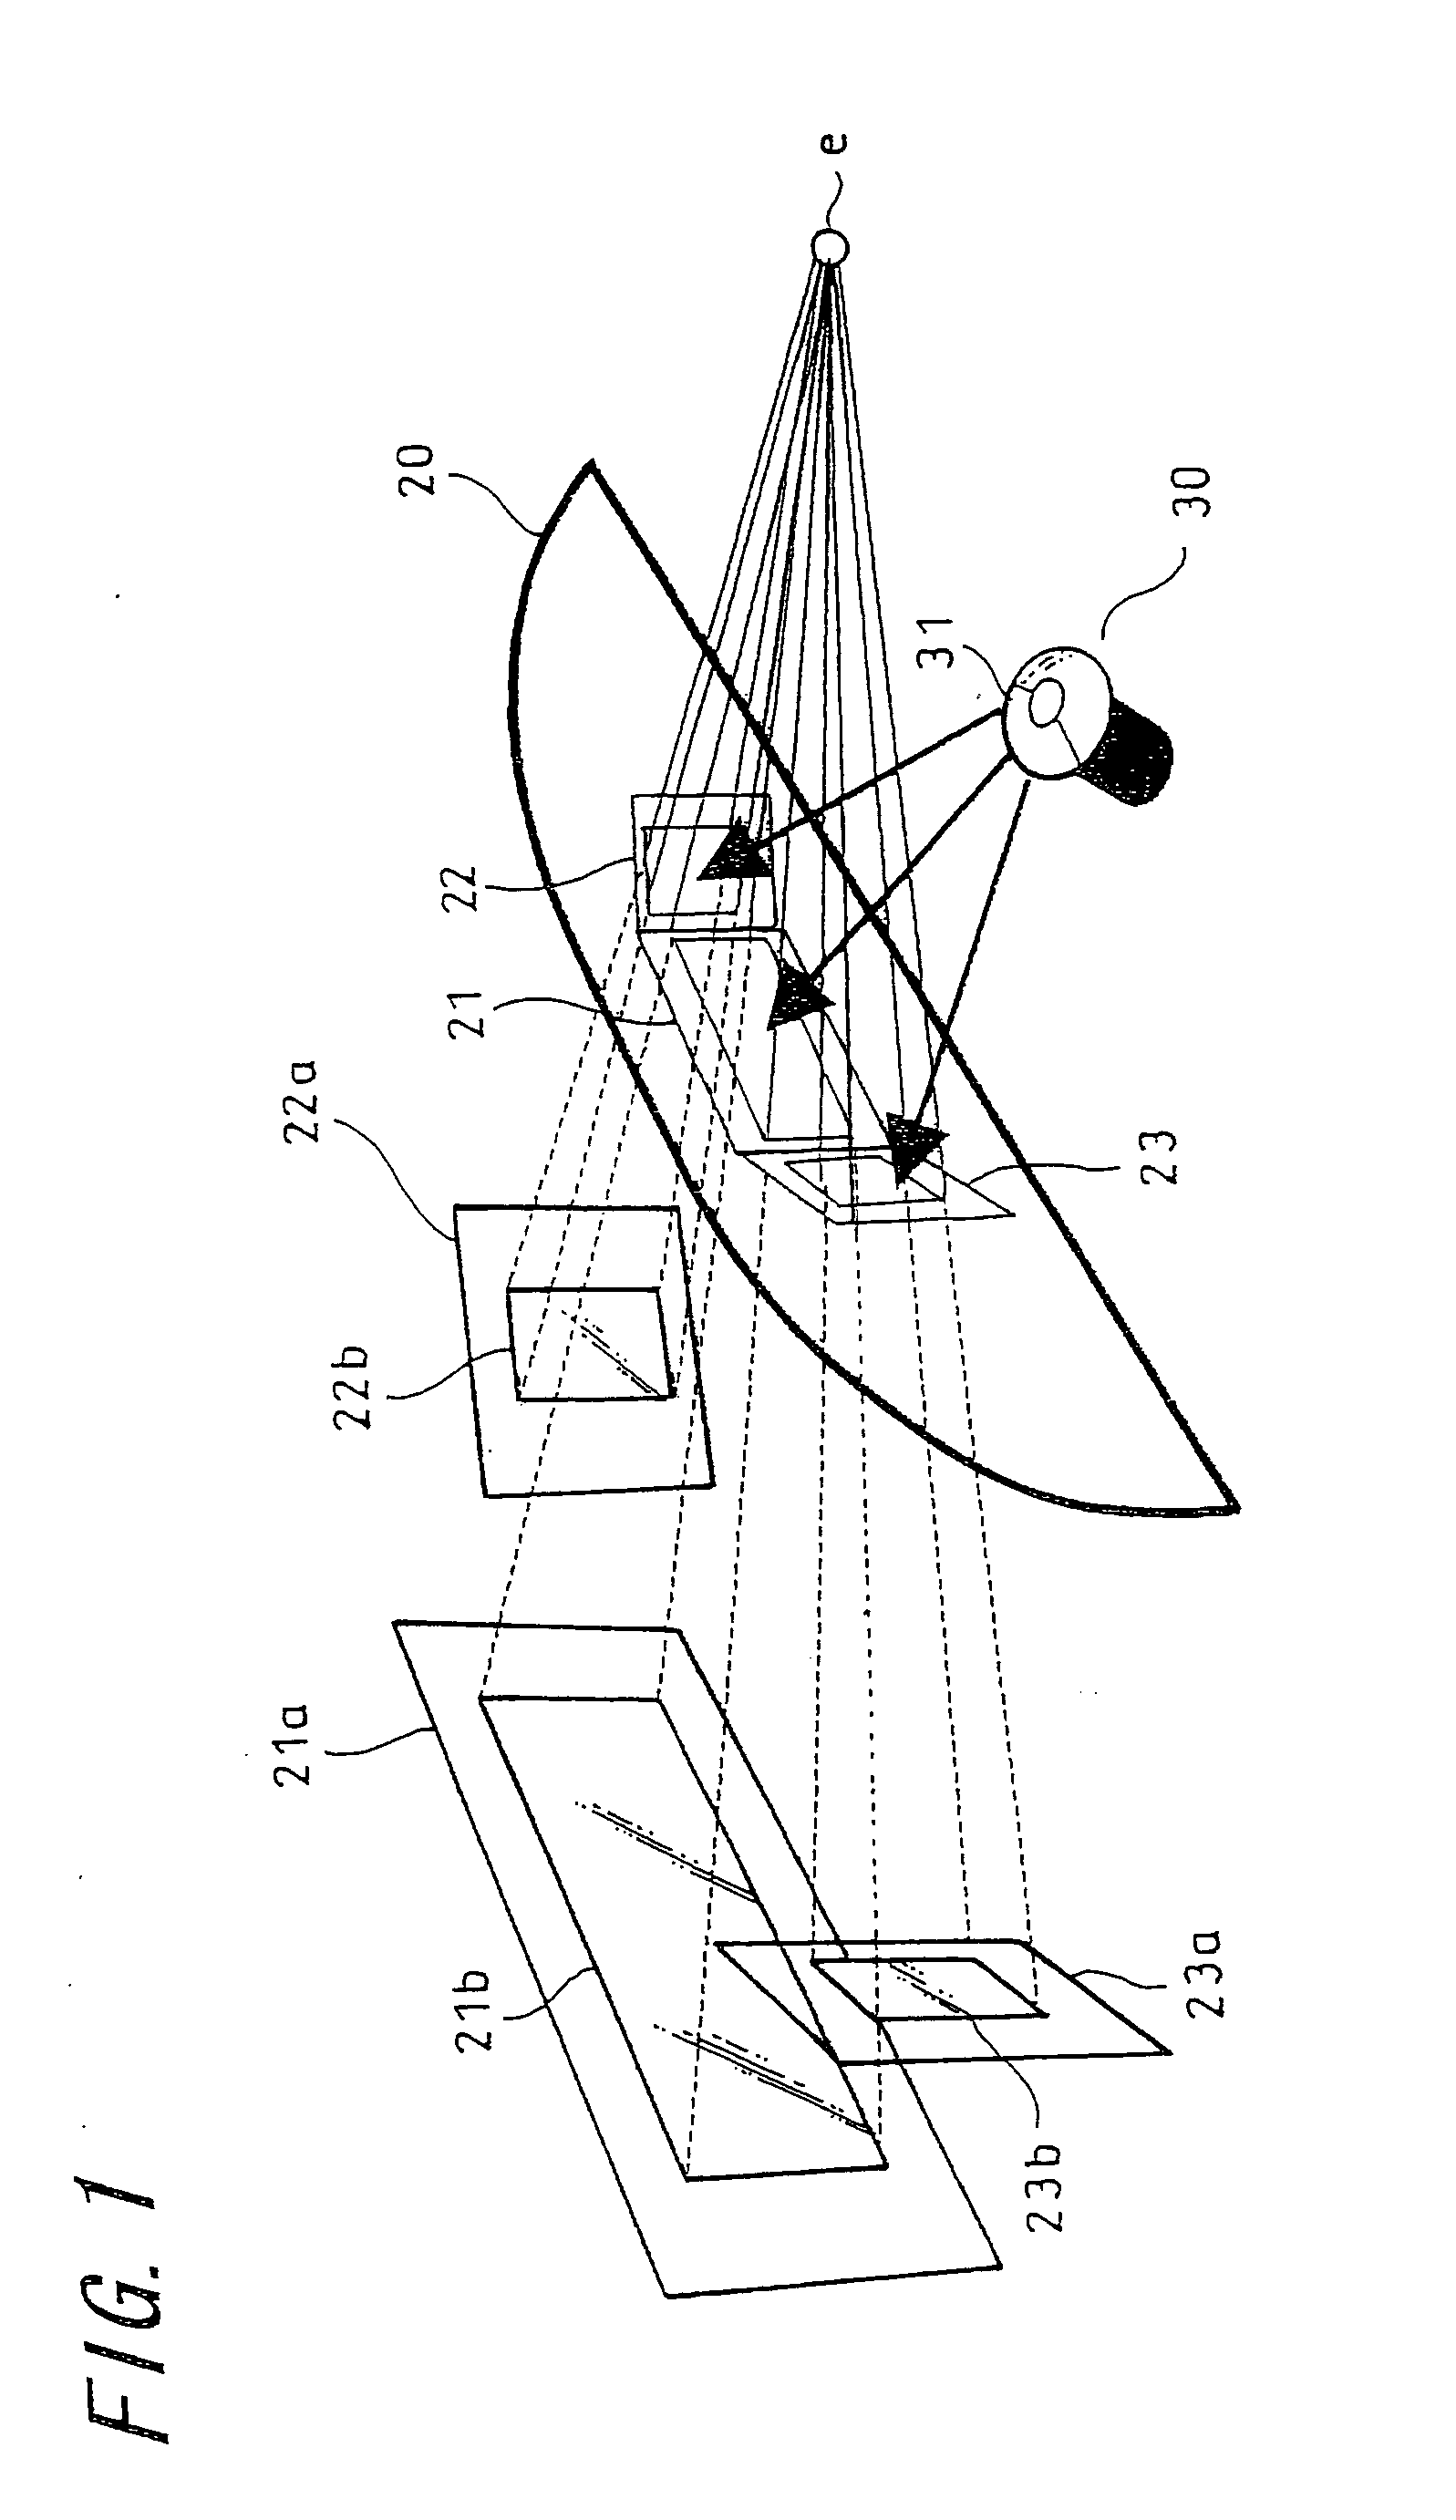 Image display apparatus for mounting on vehicle